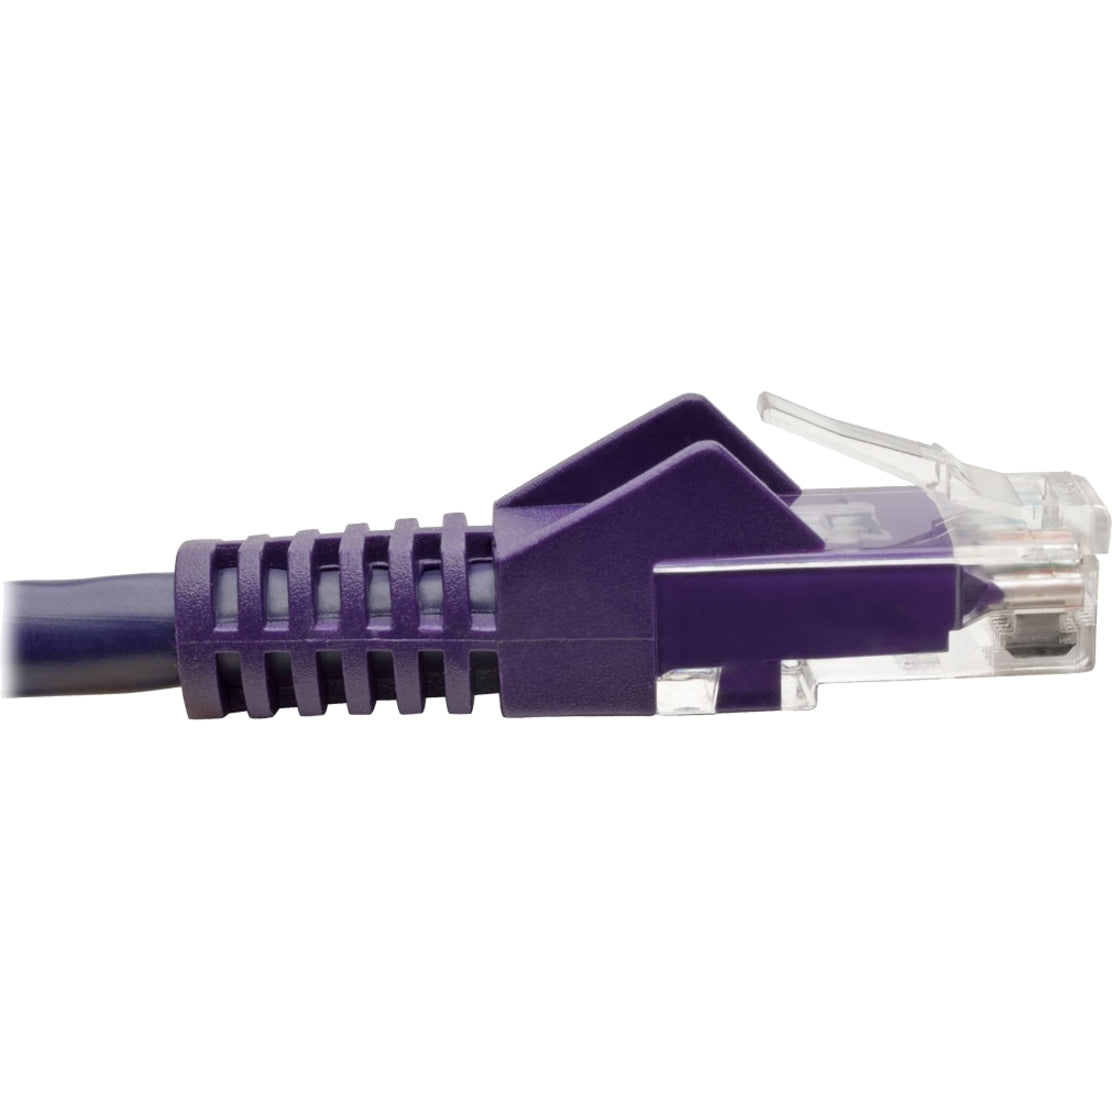 Tripp Lite N201-002-PU Cat6 Gigabit Snagless Molded Patch Cable, Purple, 2 ft, Crosstalk Protection, Flexible, 1 Gbit/s Data Transfer Rate